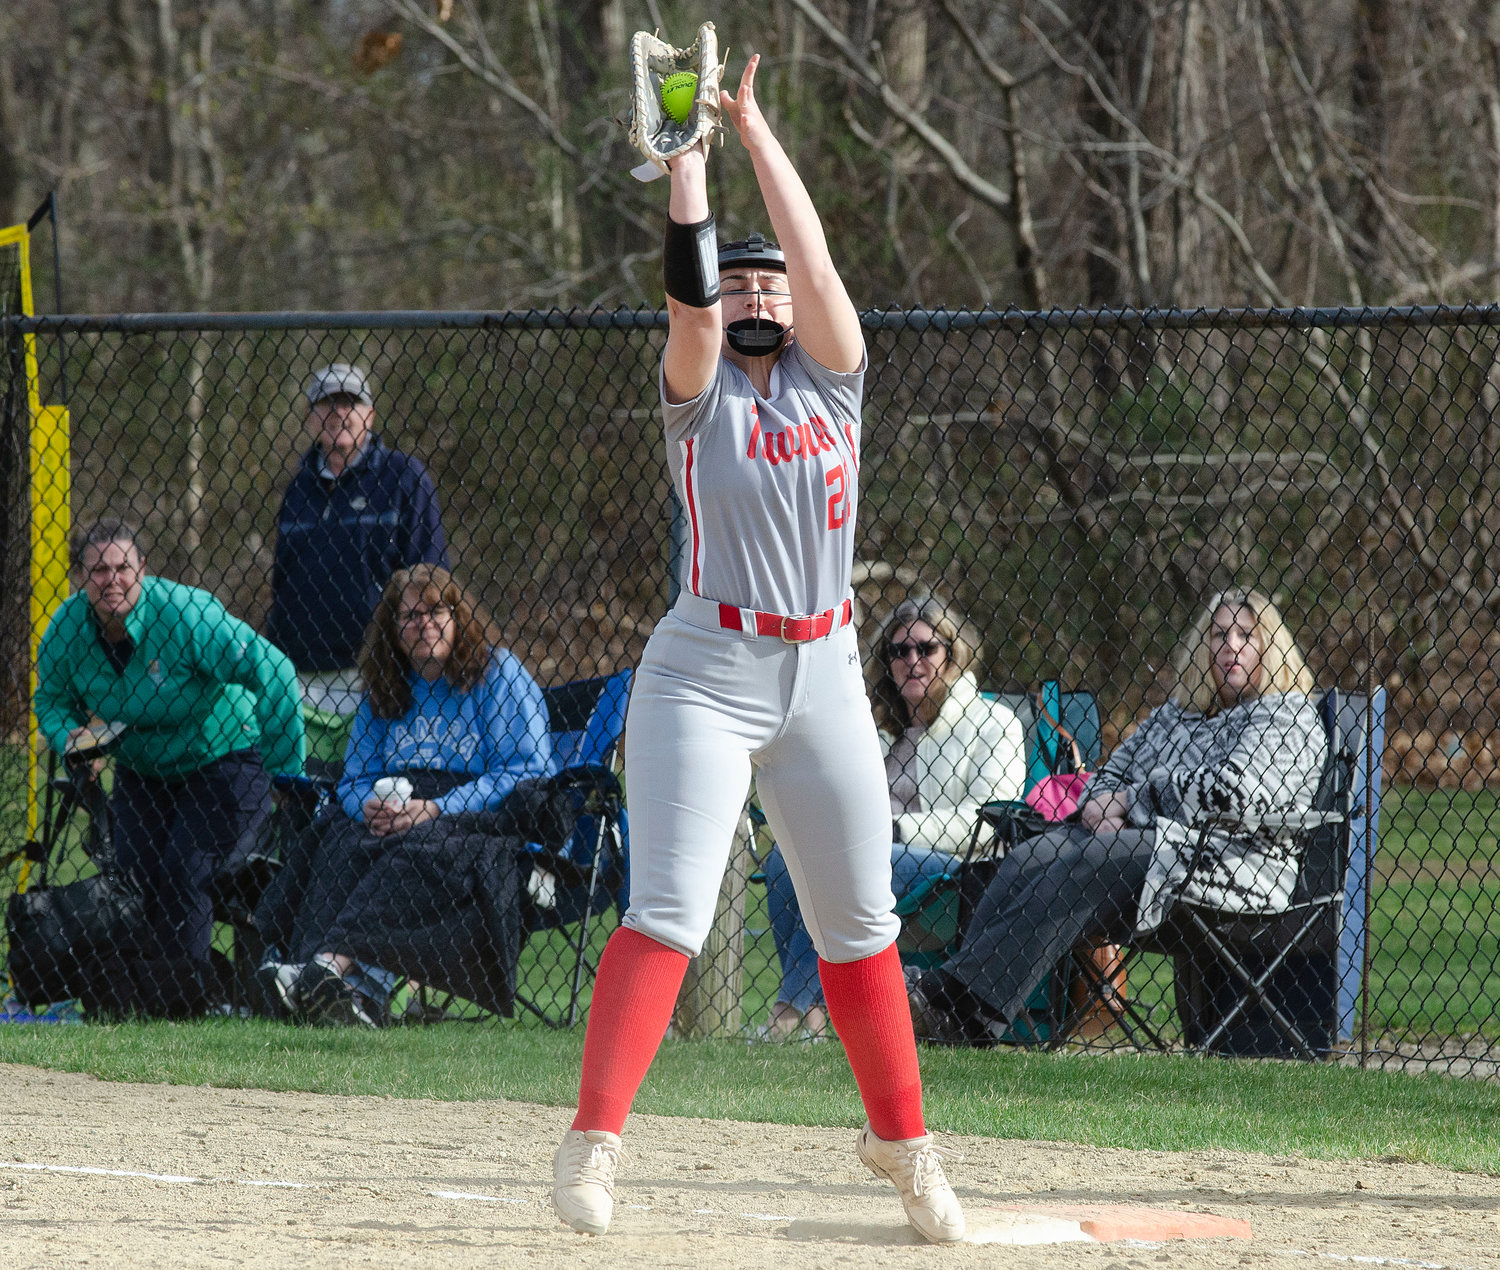 EPHS first baseman Emma Bergeron stretches to make a put-out for the Townies in their recent softball home outing against Scituate.